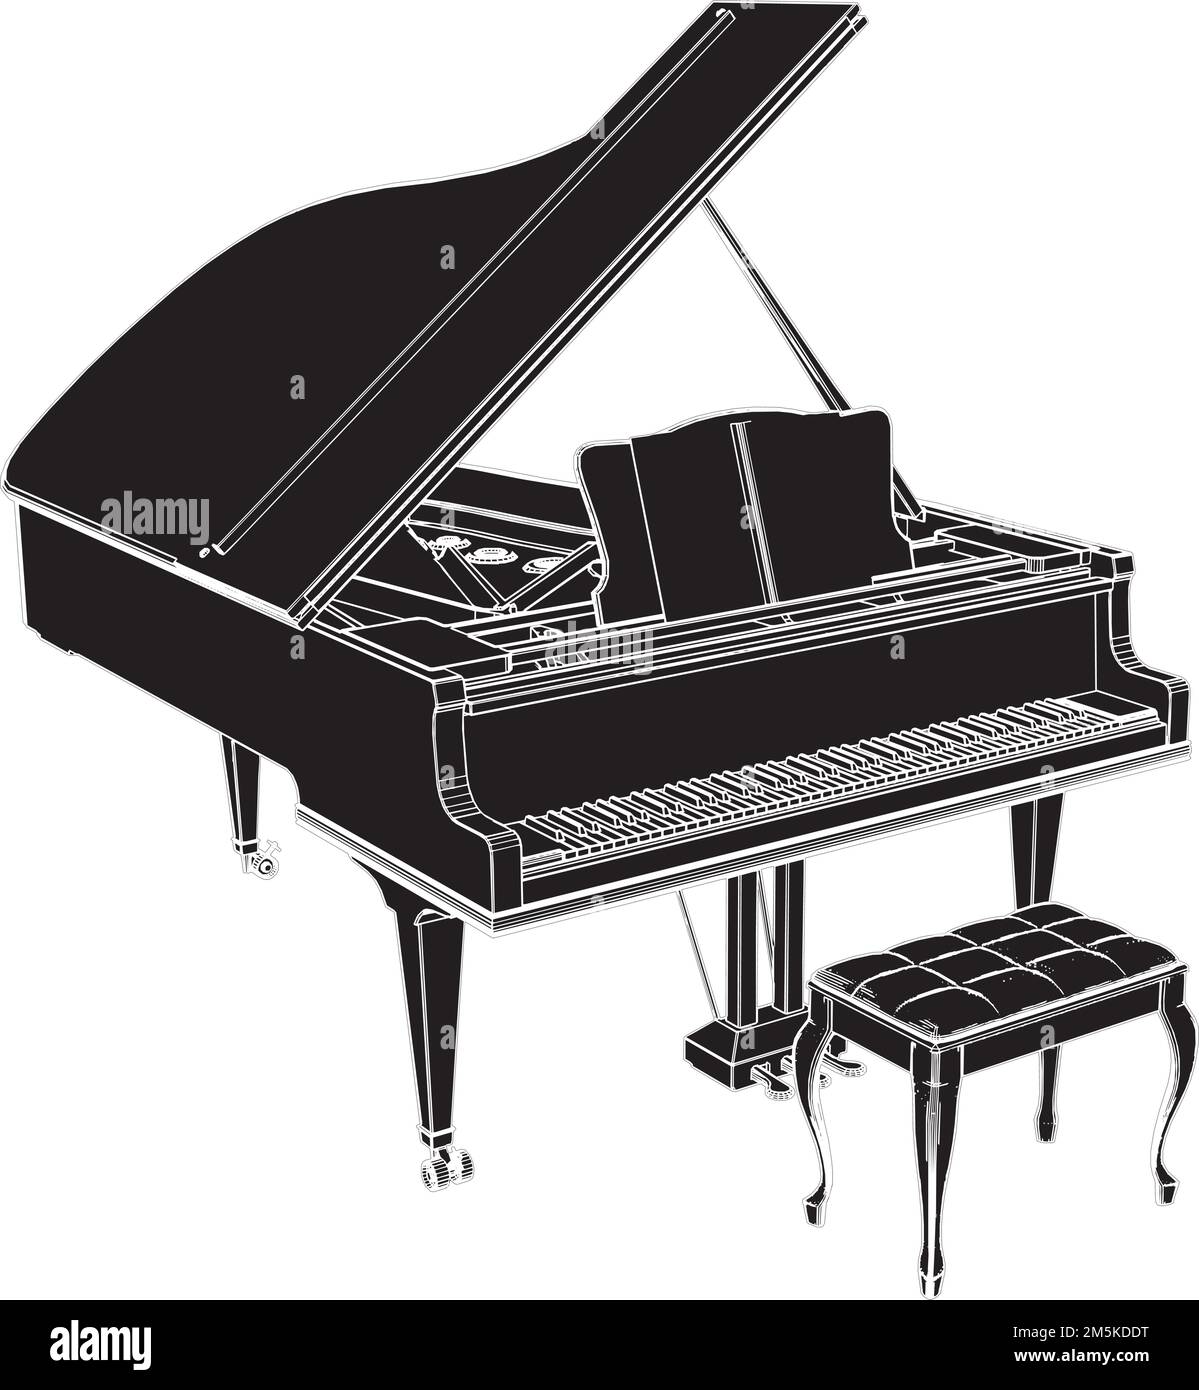 Piano Vector Illustration On White Background A Vector Illustration Of A Piano Stock Vector